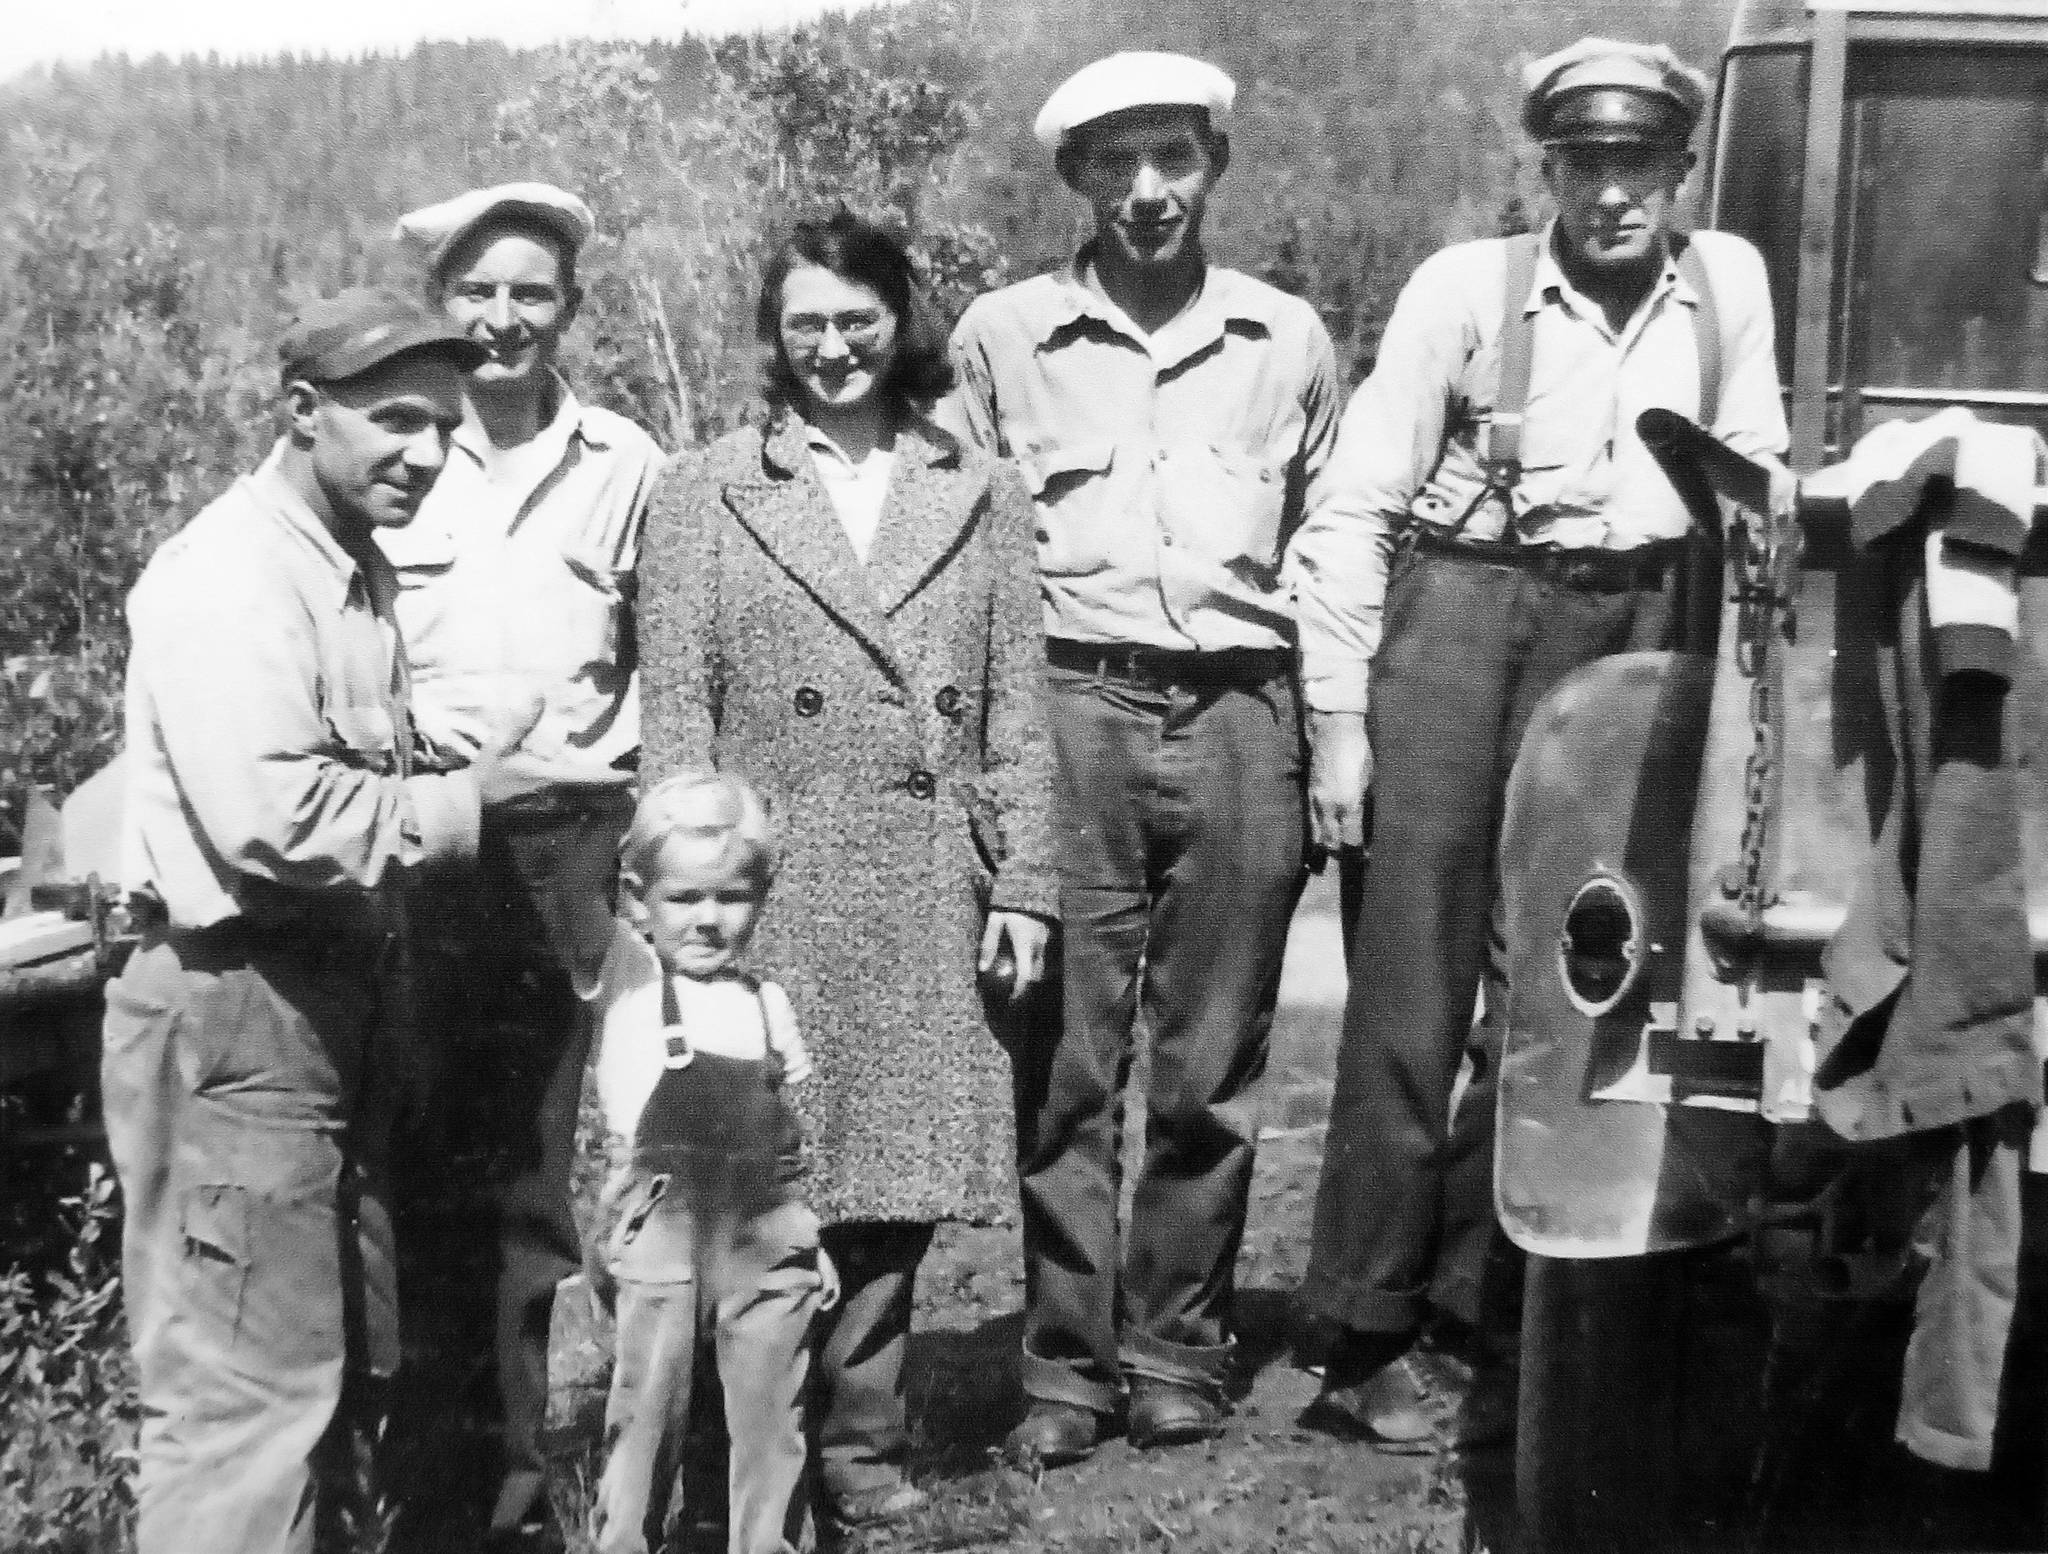 Photo provided by Mona Painter 
Cooper Landing characters (from left): “Little Jim” Dunmire, Harold and Gary Davis, Beverly and Joe Sabrowski, and “Big Jim” O’Brien, circa 1940s.